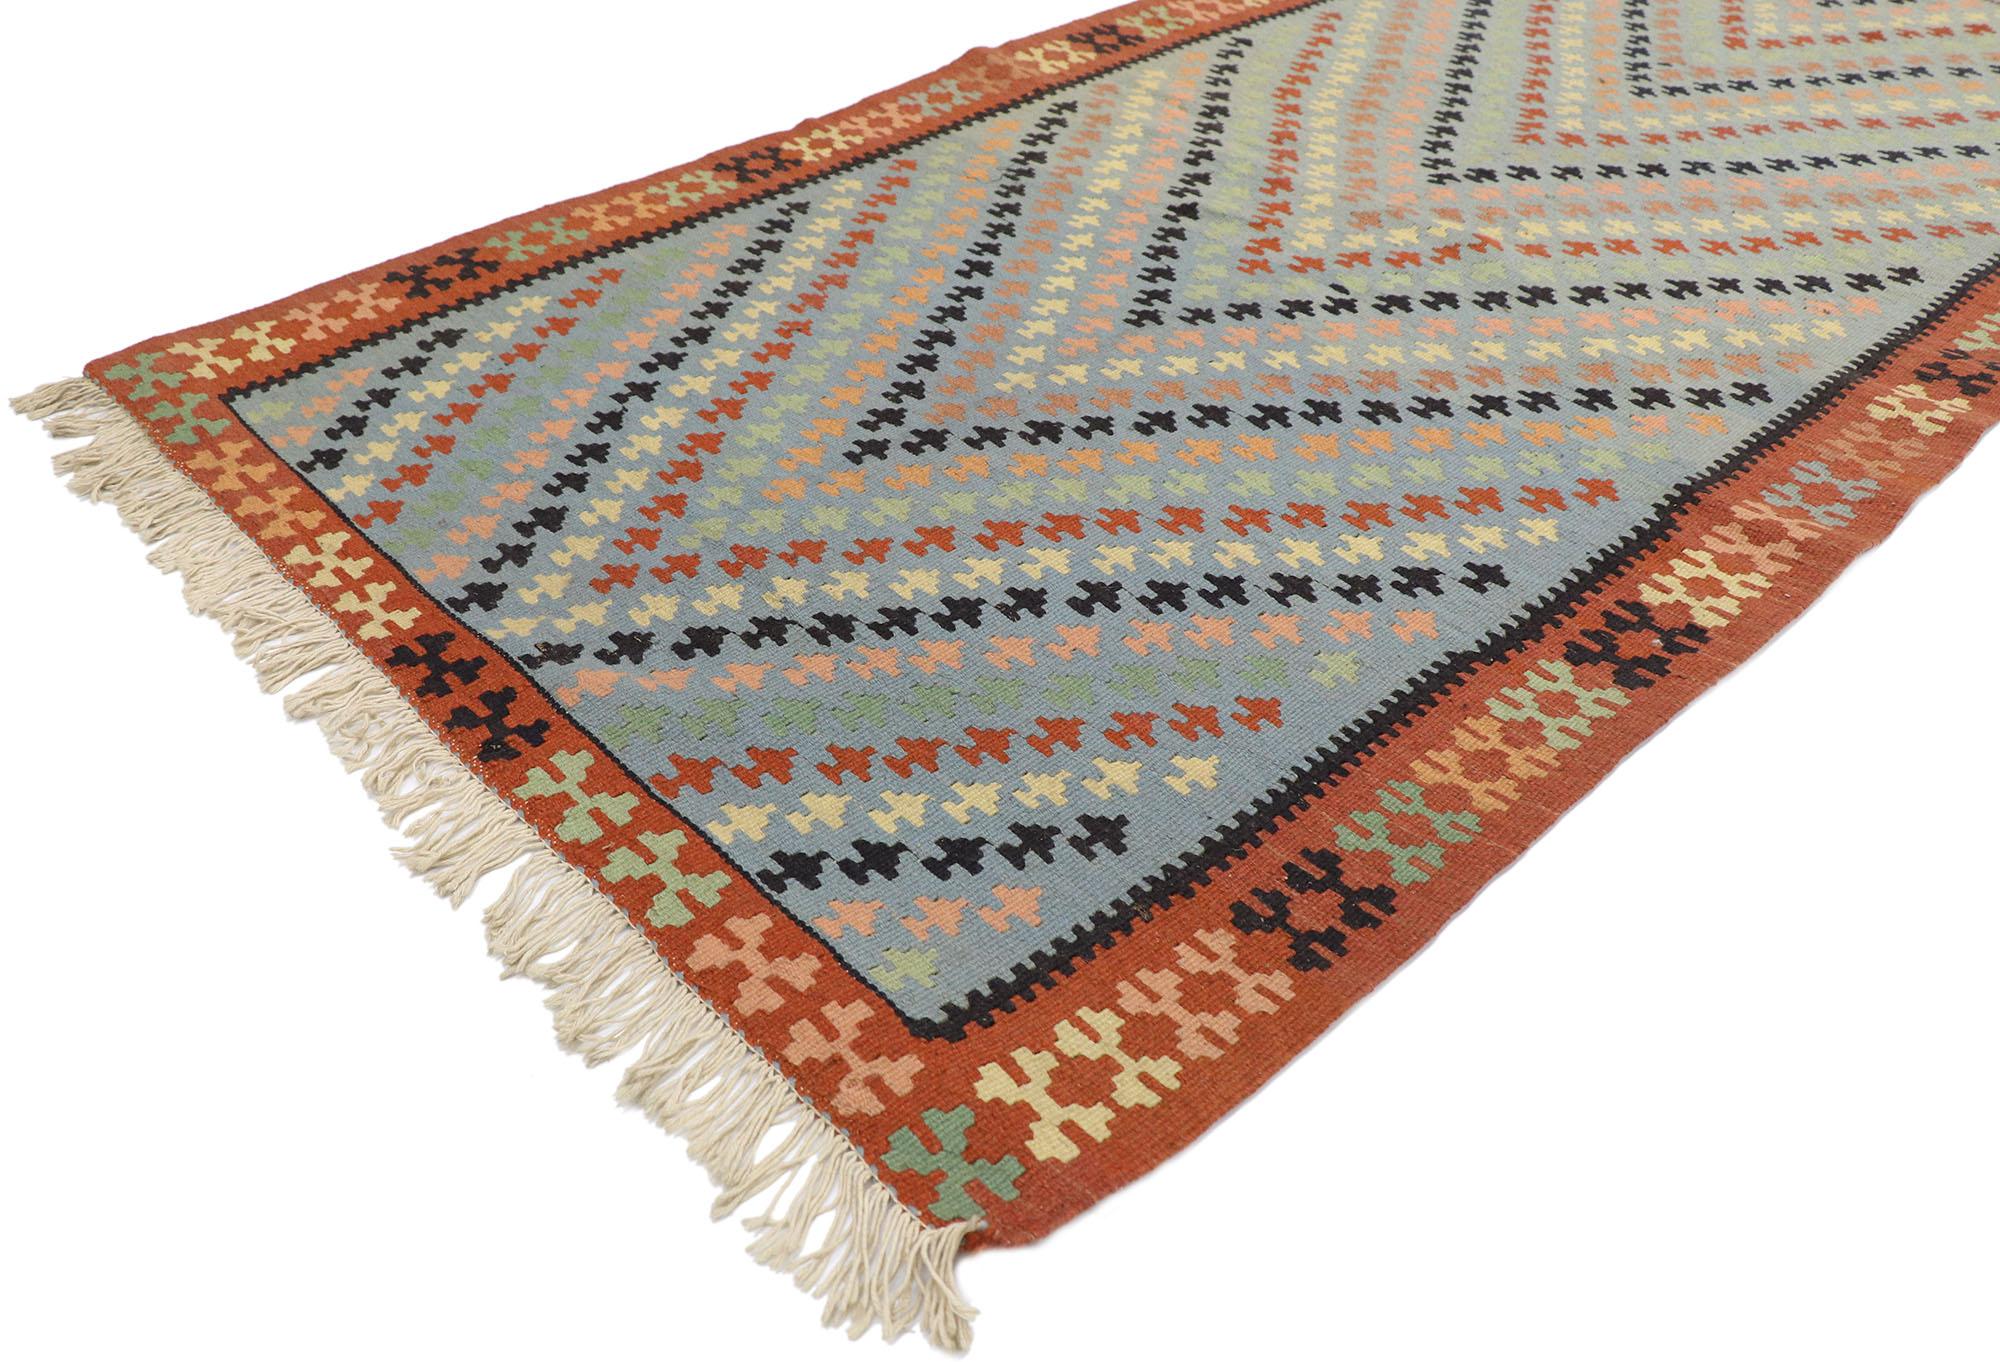 77808 vintage Persian Shiraz Kilim rug with Boho Chic Tribal style 03'05 x 06'07. This hand-woven wool vintage Persian Shiraz kilim rug features an all-over pattern comprised of rows of multi-colored geometric motifs. Each row of geometric motifs